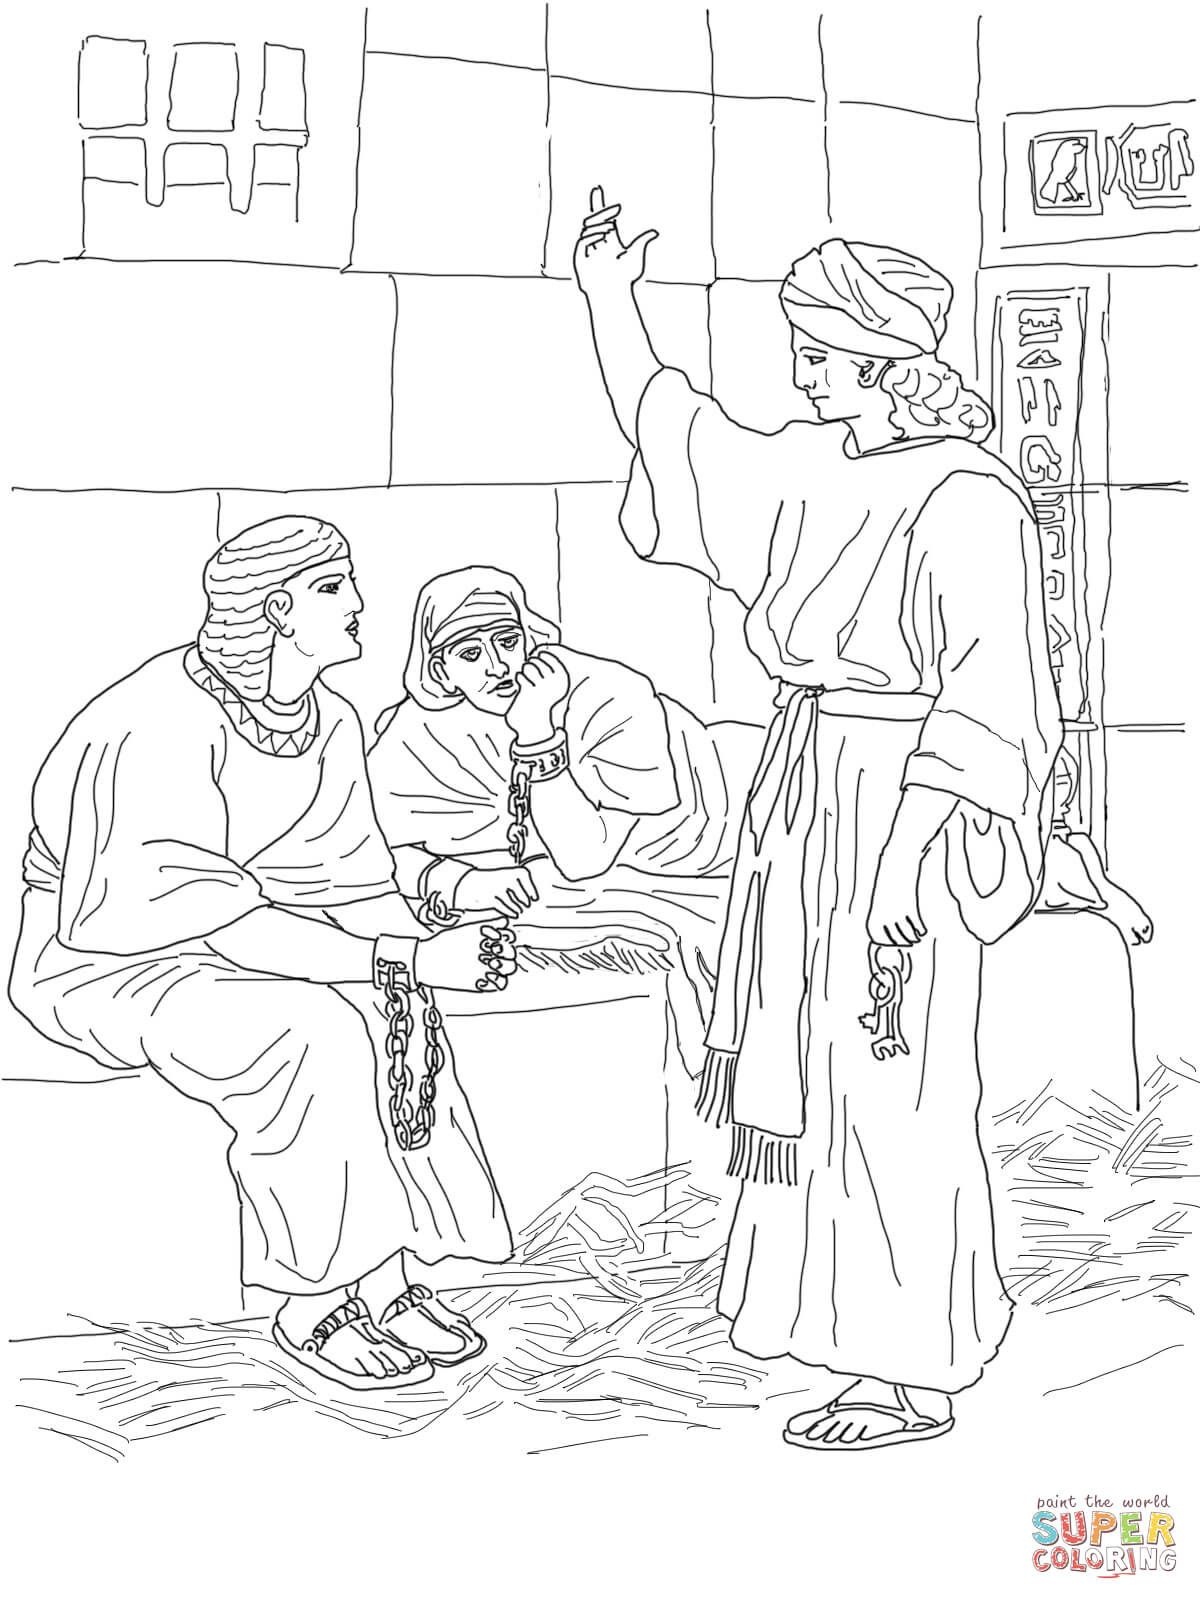 Joseph In Prison Coloring Page | Free Printable Coloring Pages - Free Printable Bible Story Coloring Pages